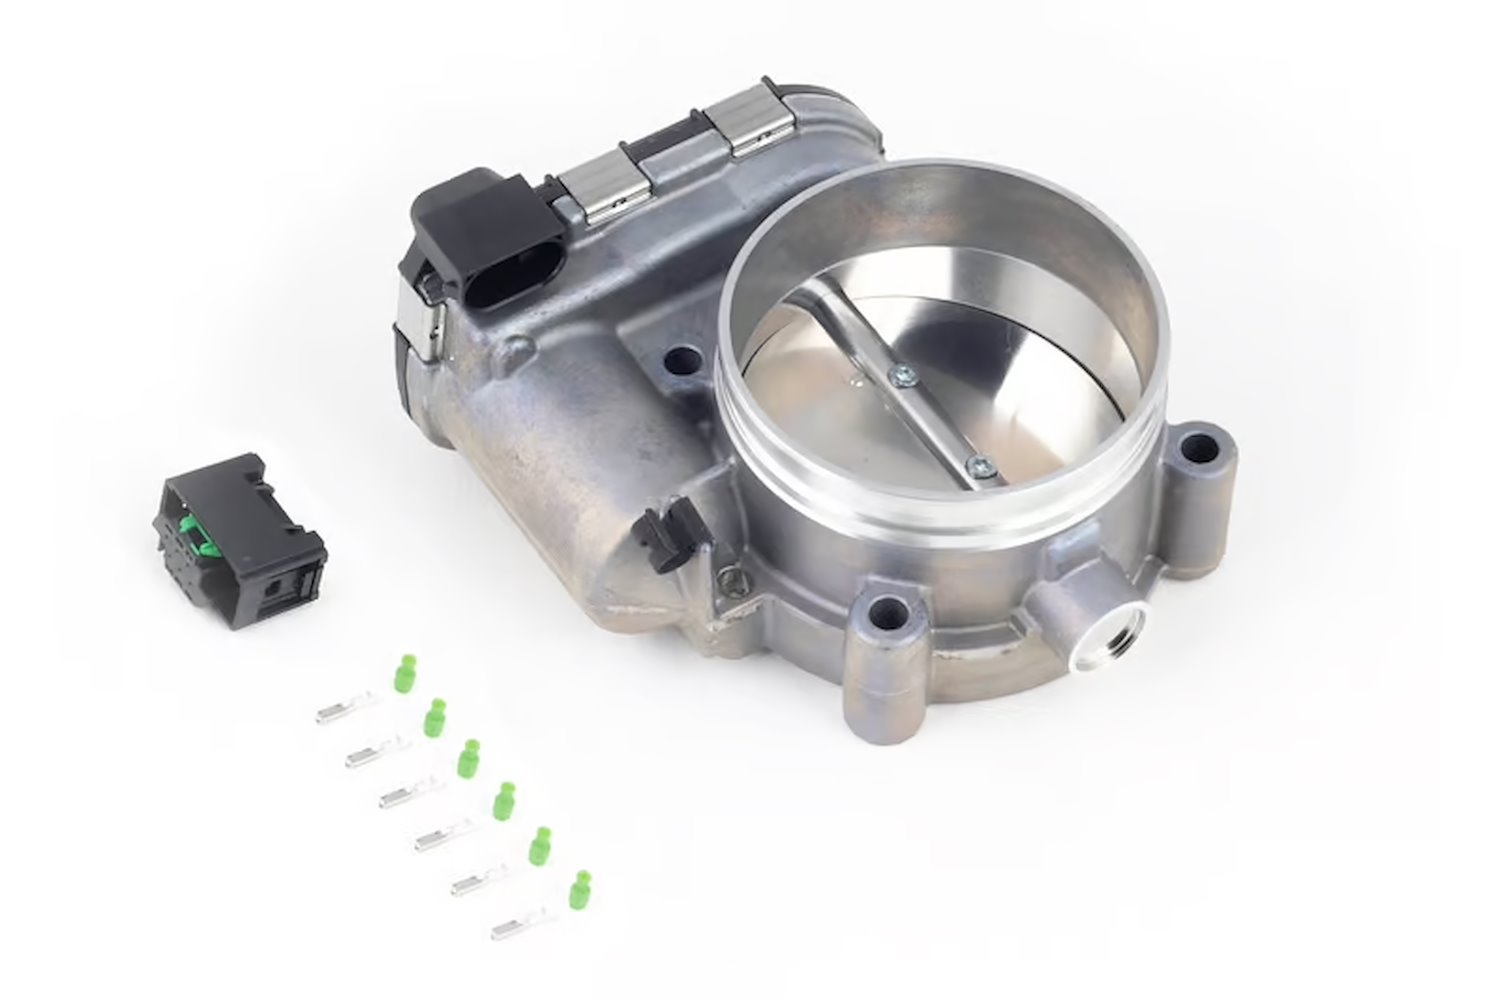 HT-011803 Bosch 82 mm Electronic Throttle Body, Includes Connector and-Pins